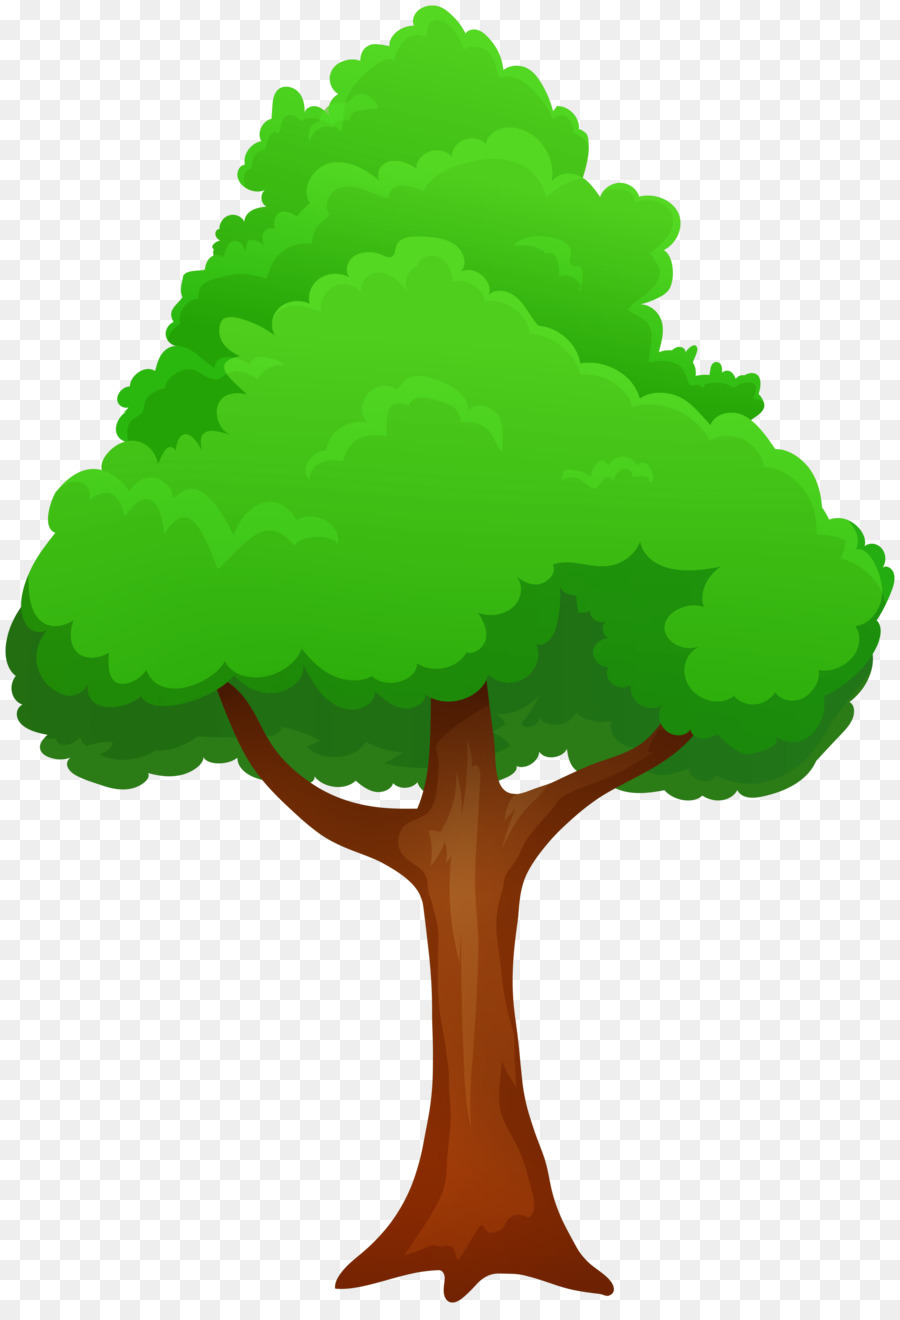 Vector graphics Drawing Clip art Image Cartoon - tree png download - 5505*8000 - Free Transparent Drawing png Download.